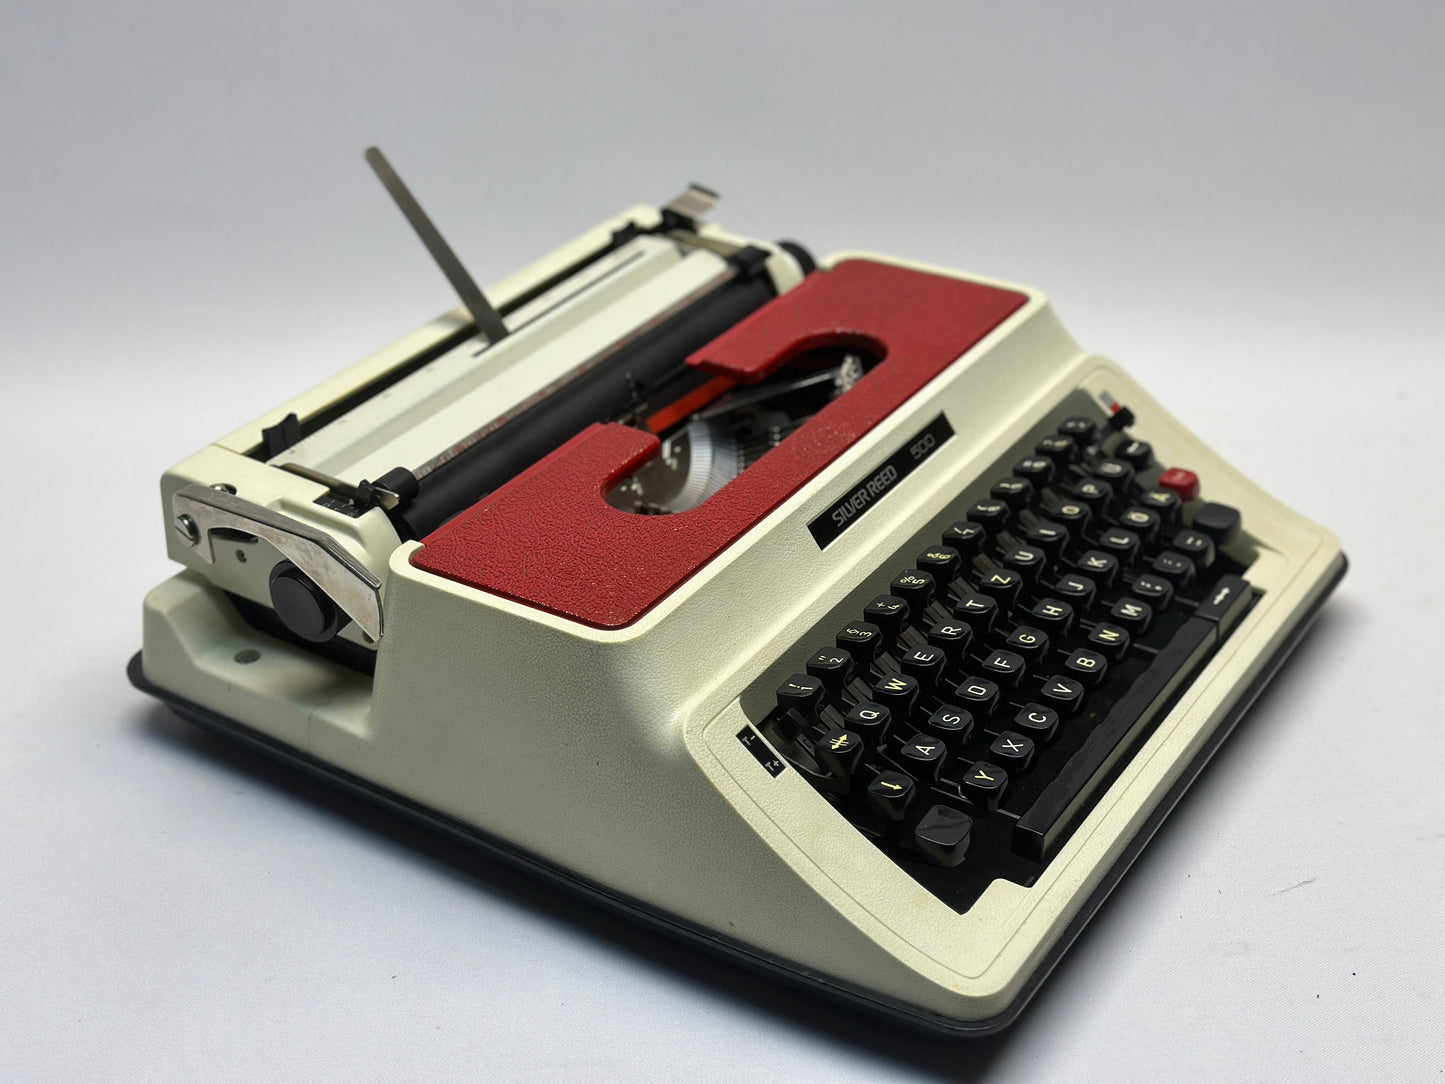 Embrace Vintage Style with the Silver Reed 500 Typewriter - Red Cover, QWERTZ Keyboard, Antique Gift